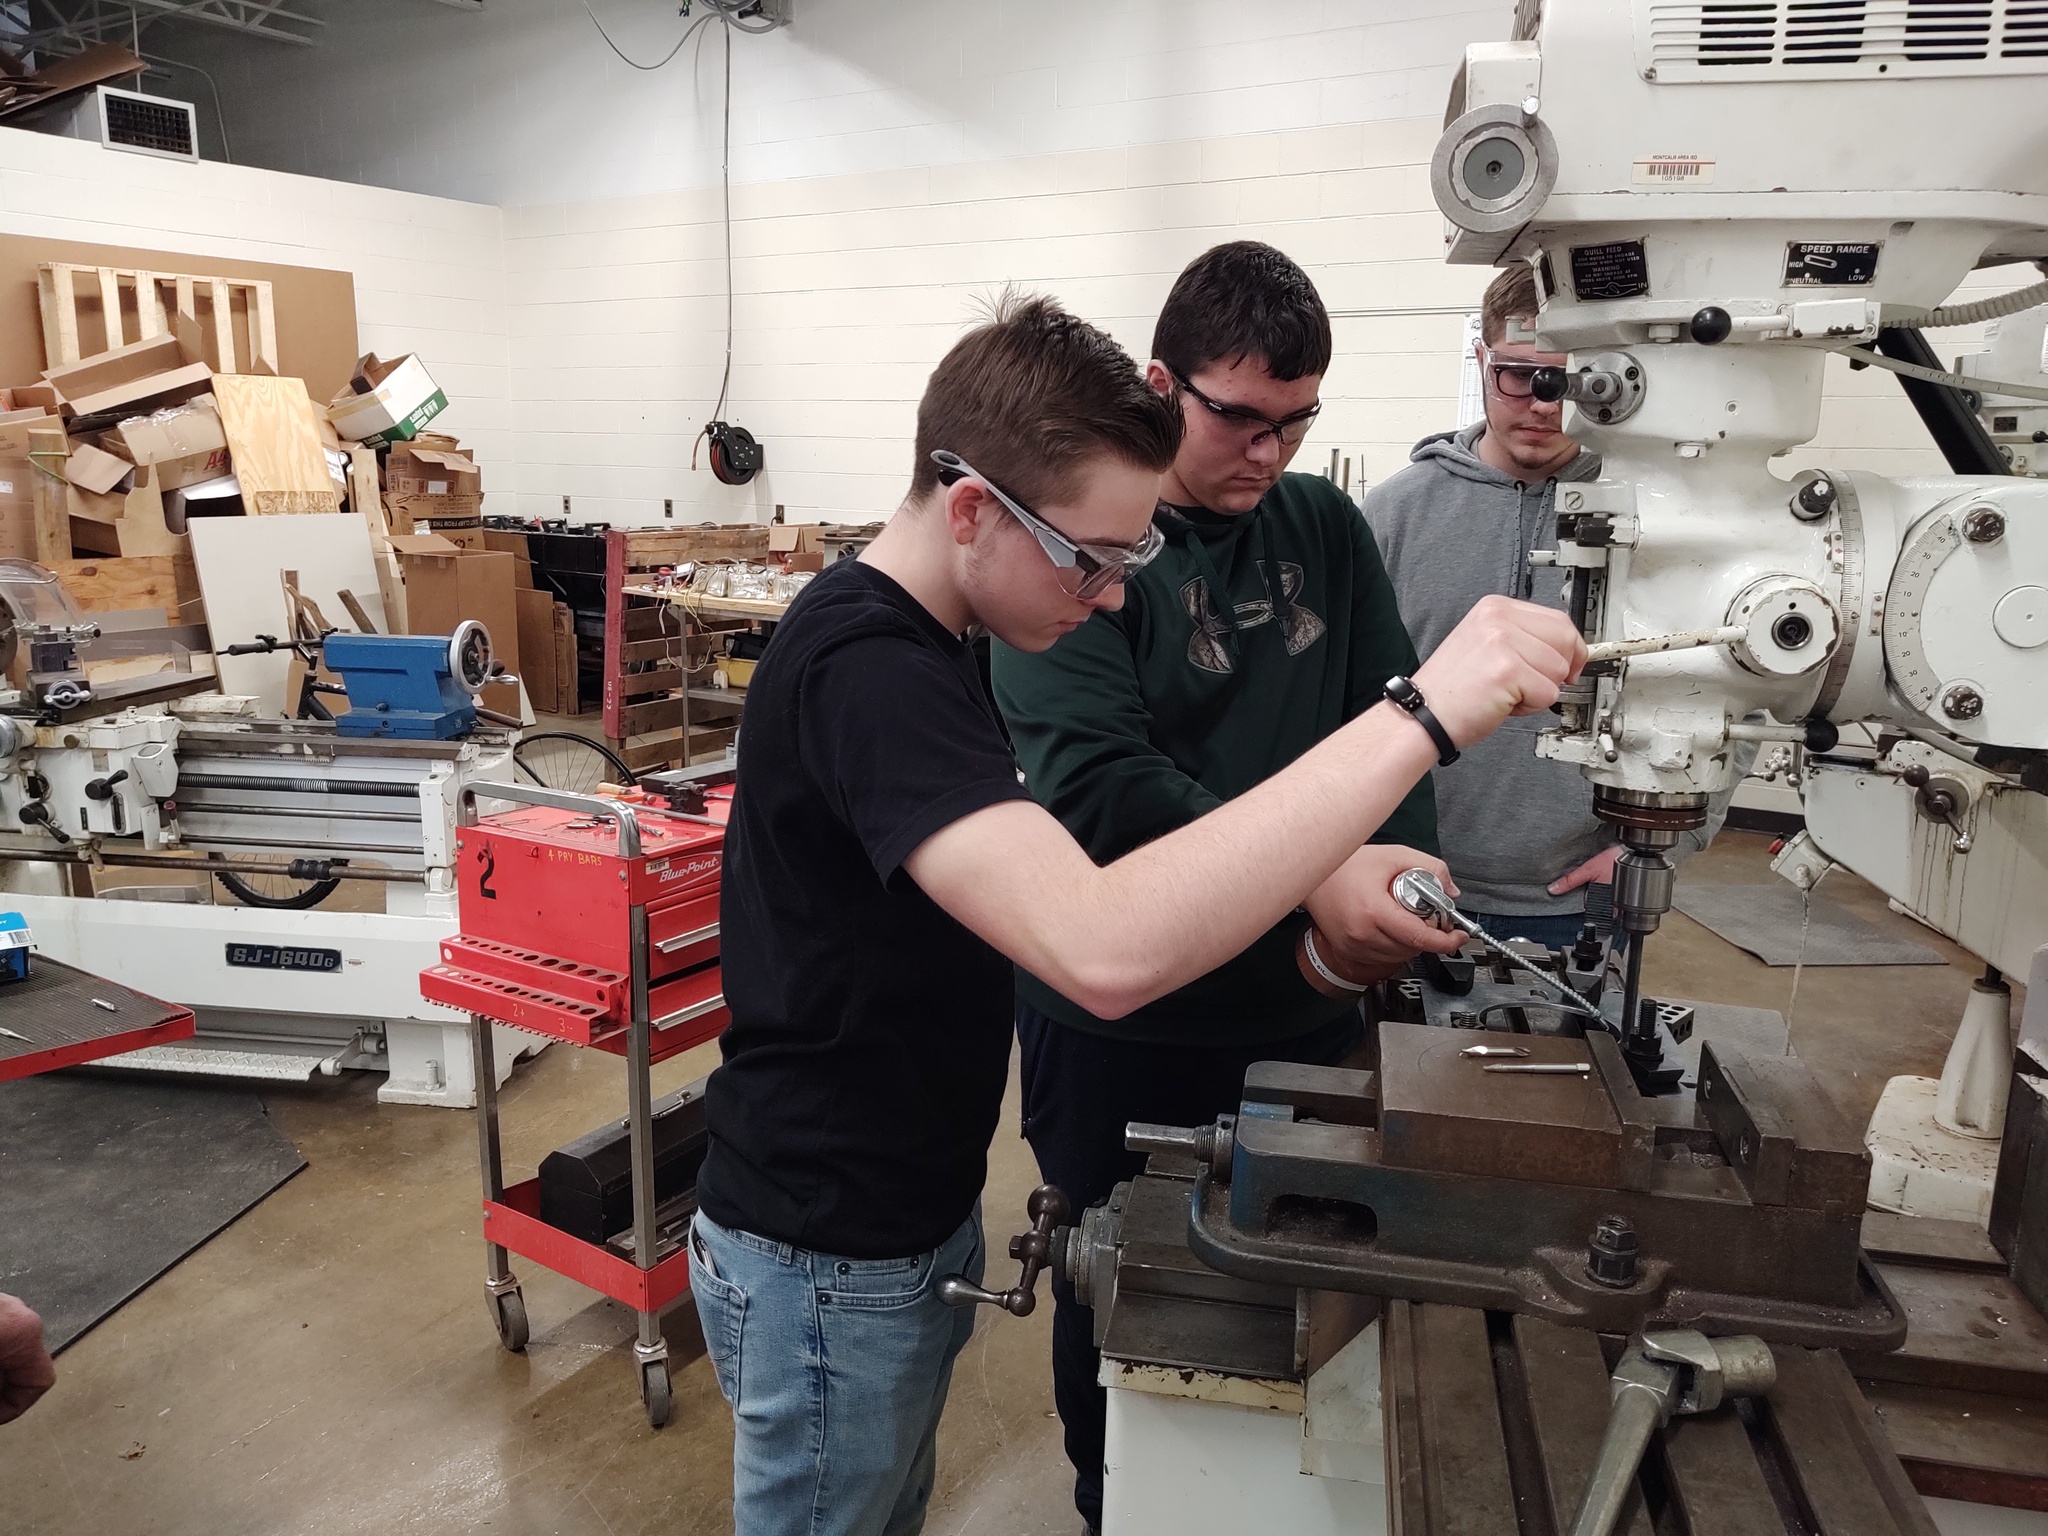 Students working on machining parts.